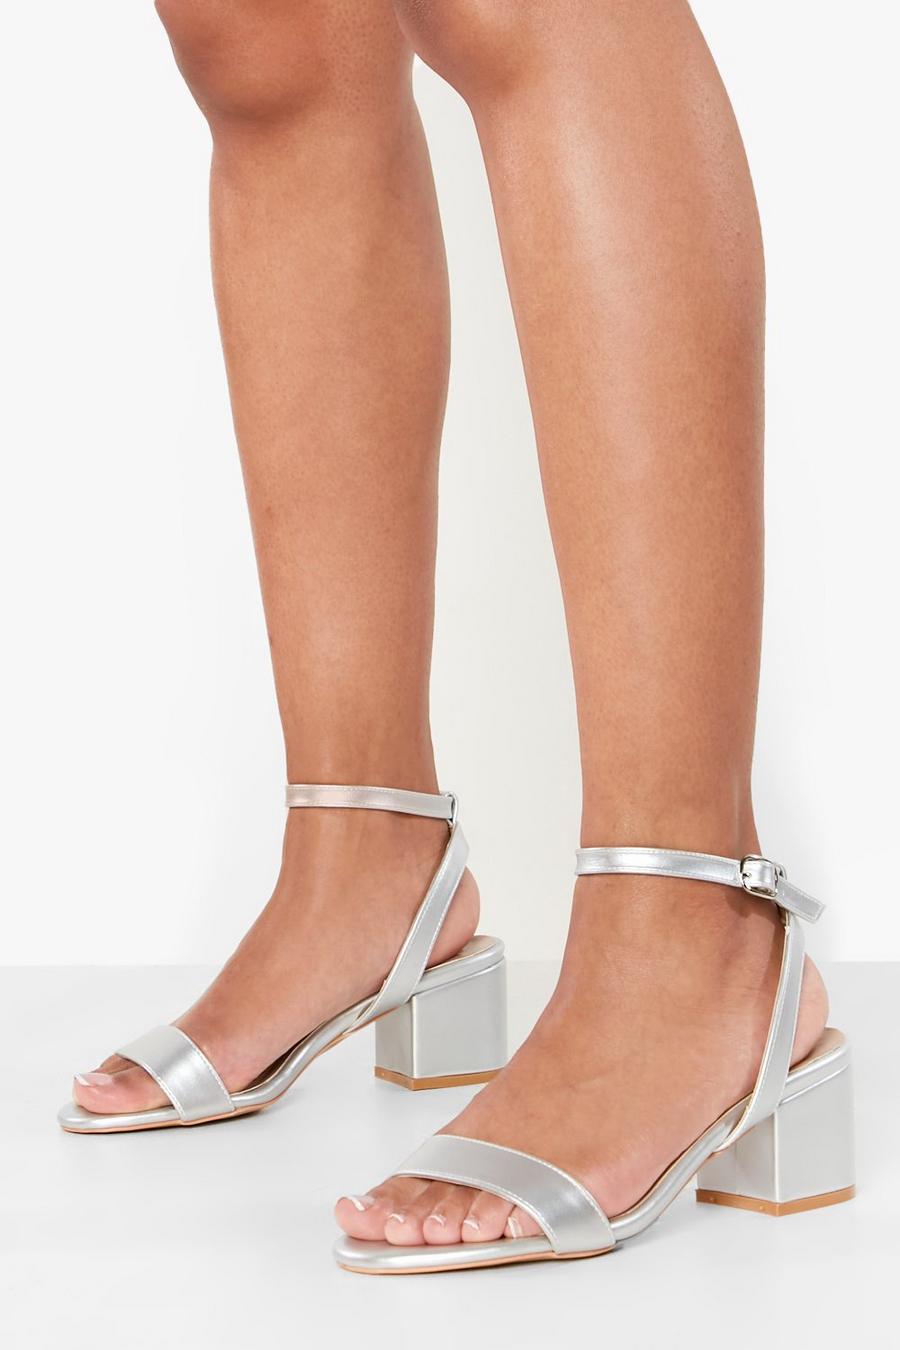 Silver Metallic Low Block Barely There Heels